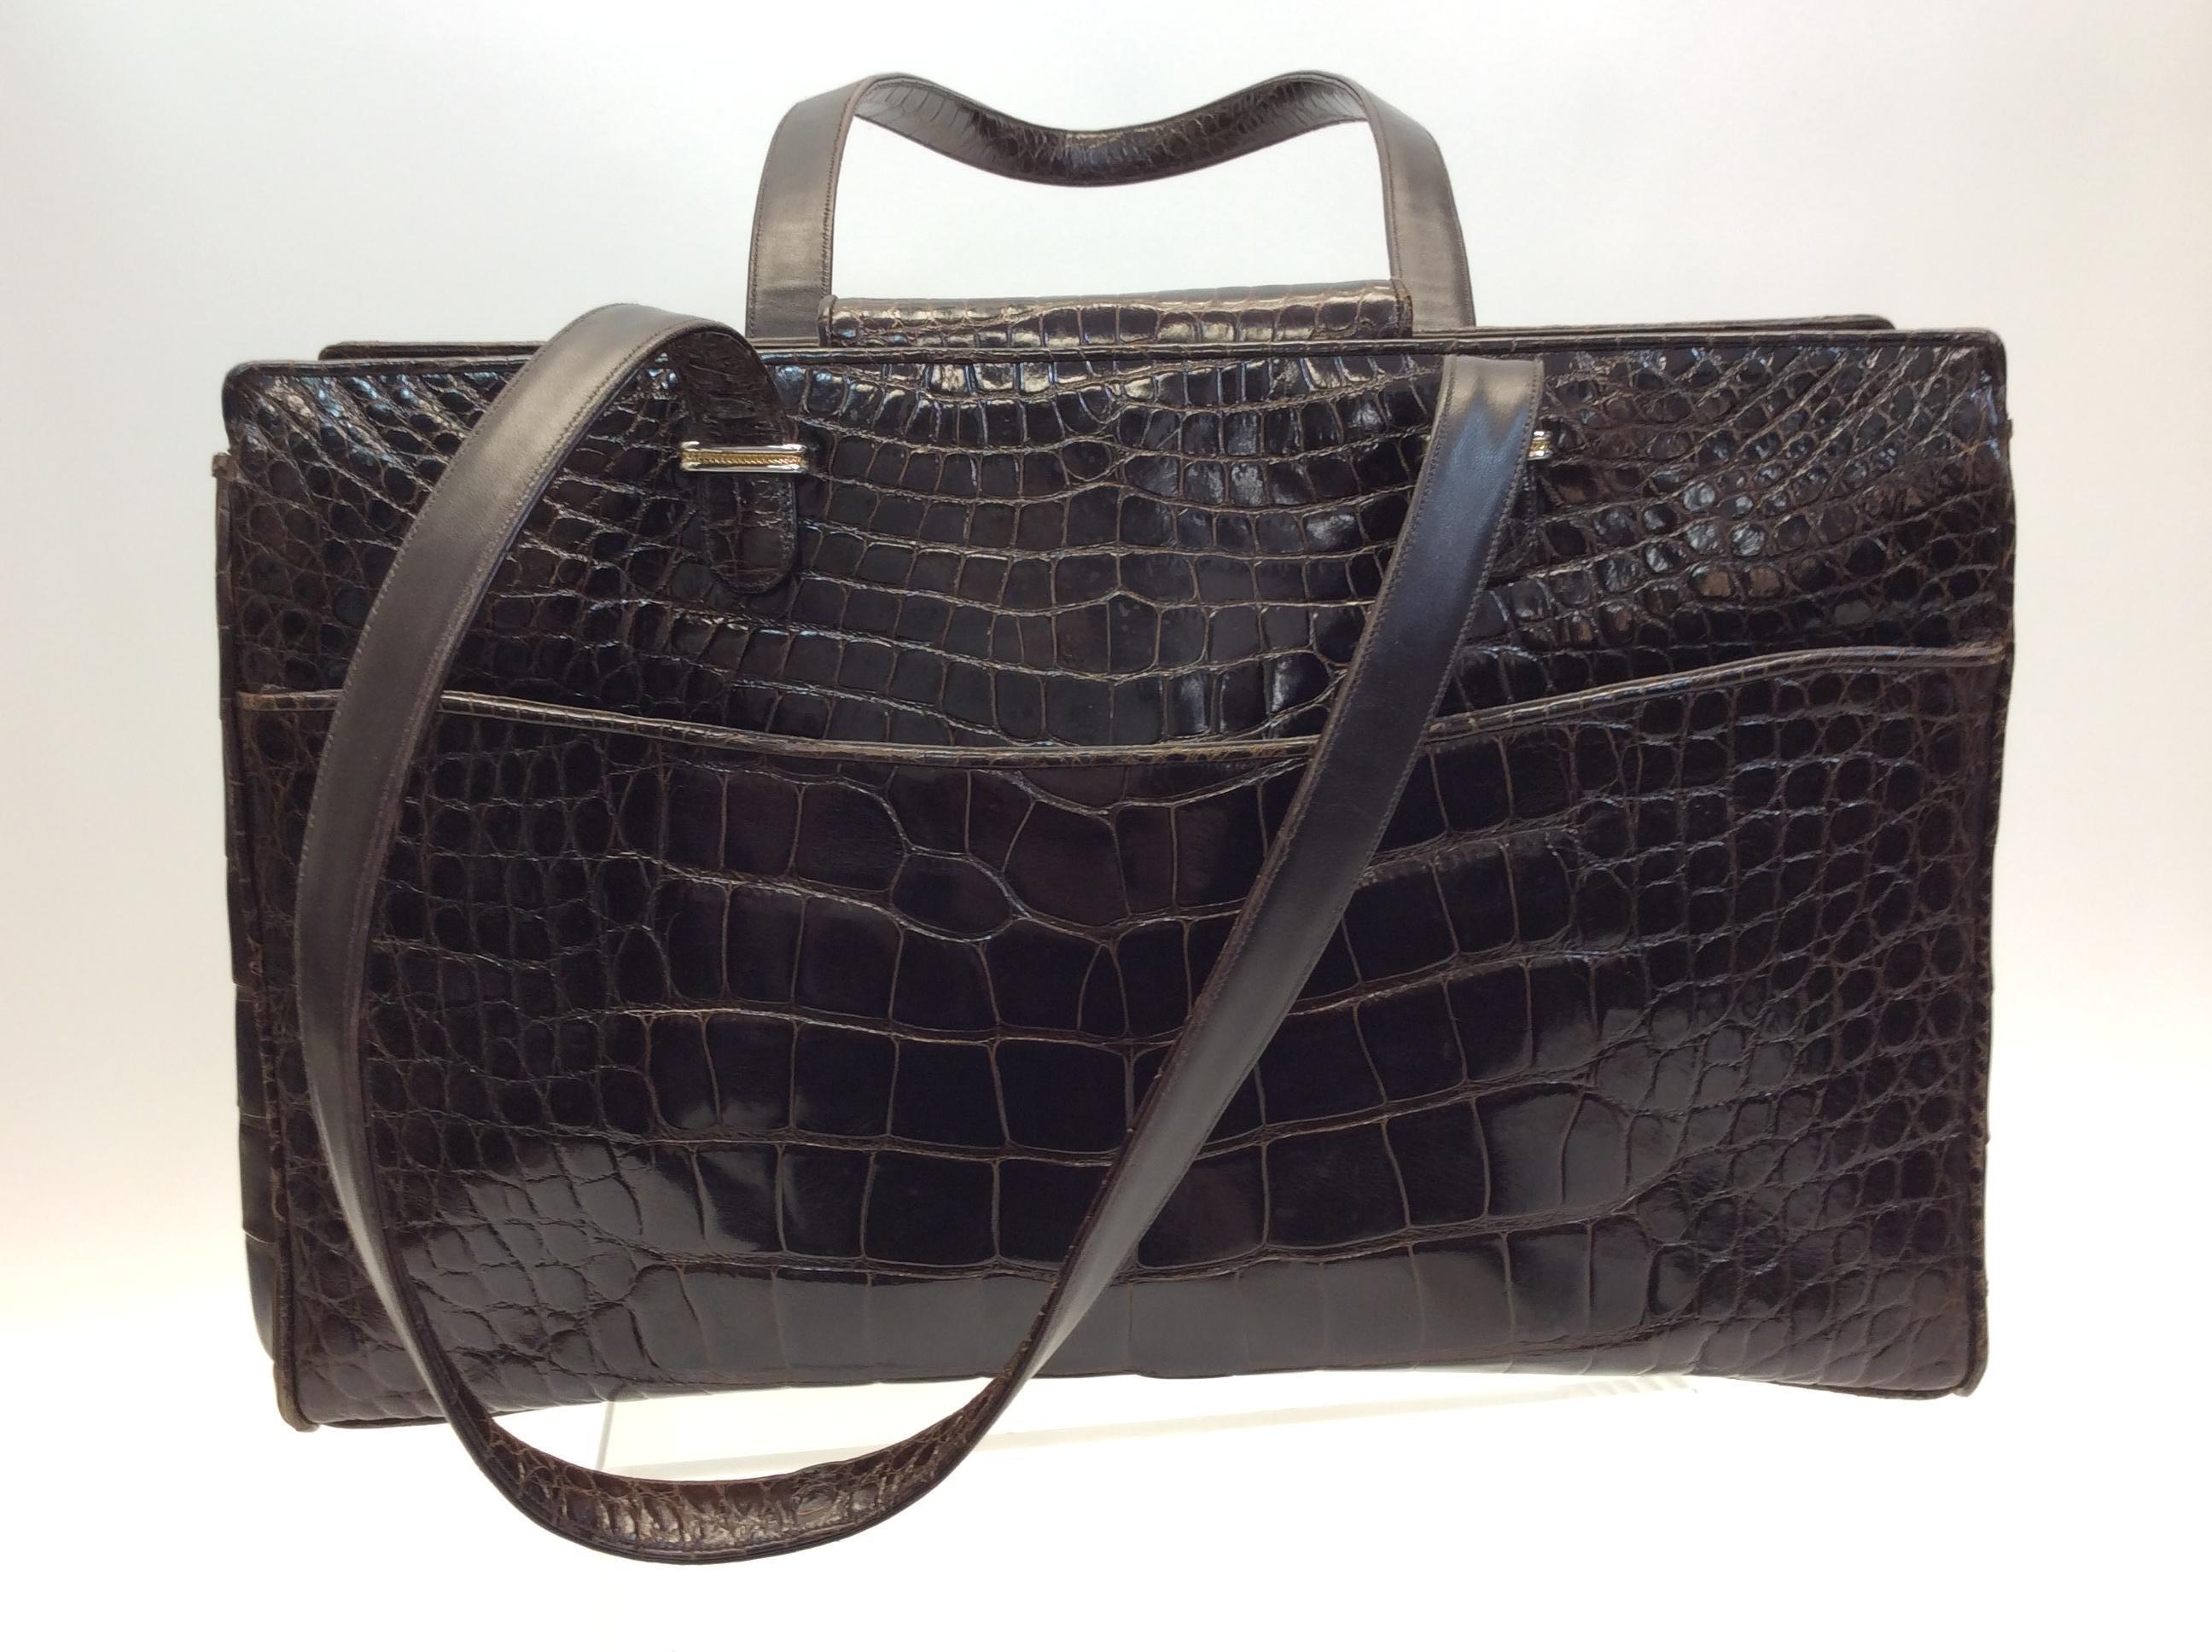 Judith Leiber Brown Crocodile Shoulder Bag In Good Condition For Sale In Narberth, PA